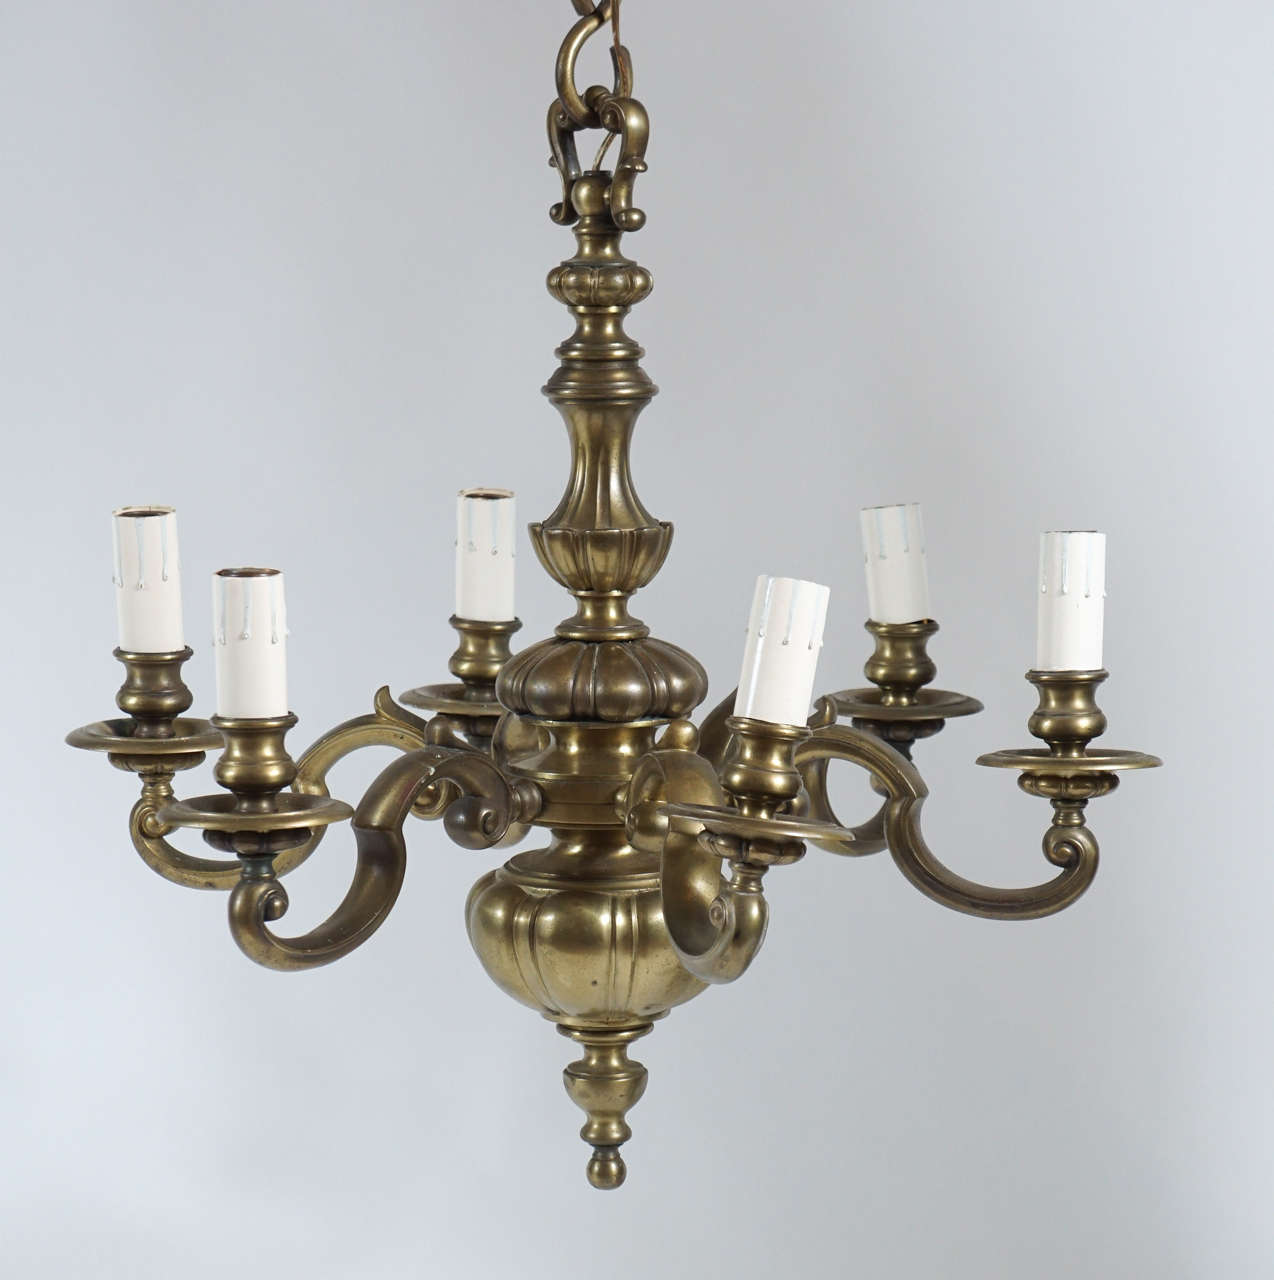 English baroque style solid bronze six light chandelier having six cusped scroll arms on gadrooned and fluted main body. Wonderful colour and patina. Photos show a skewed arm, however all arms can be positioned as desired as they swivel. Body alone